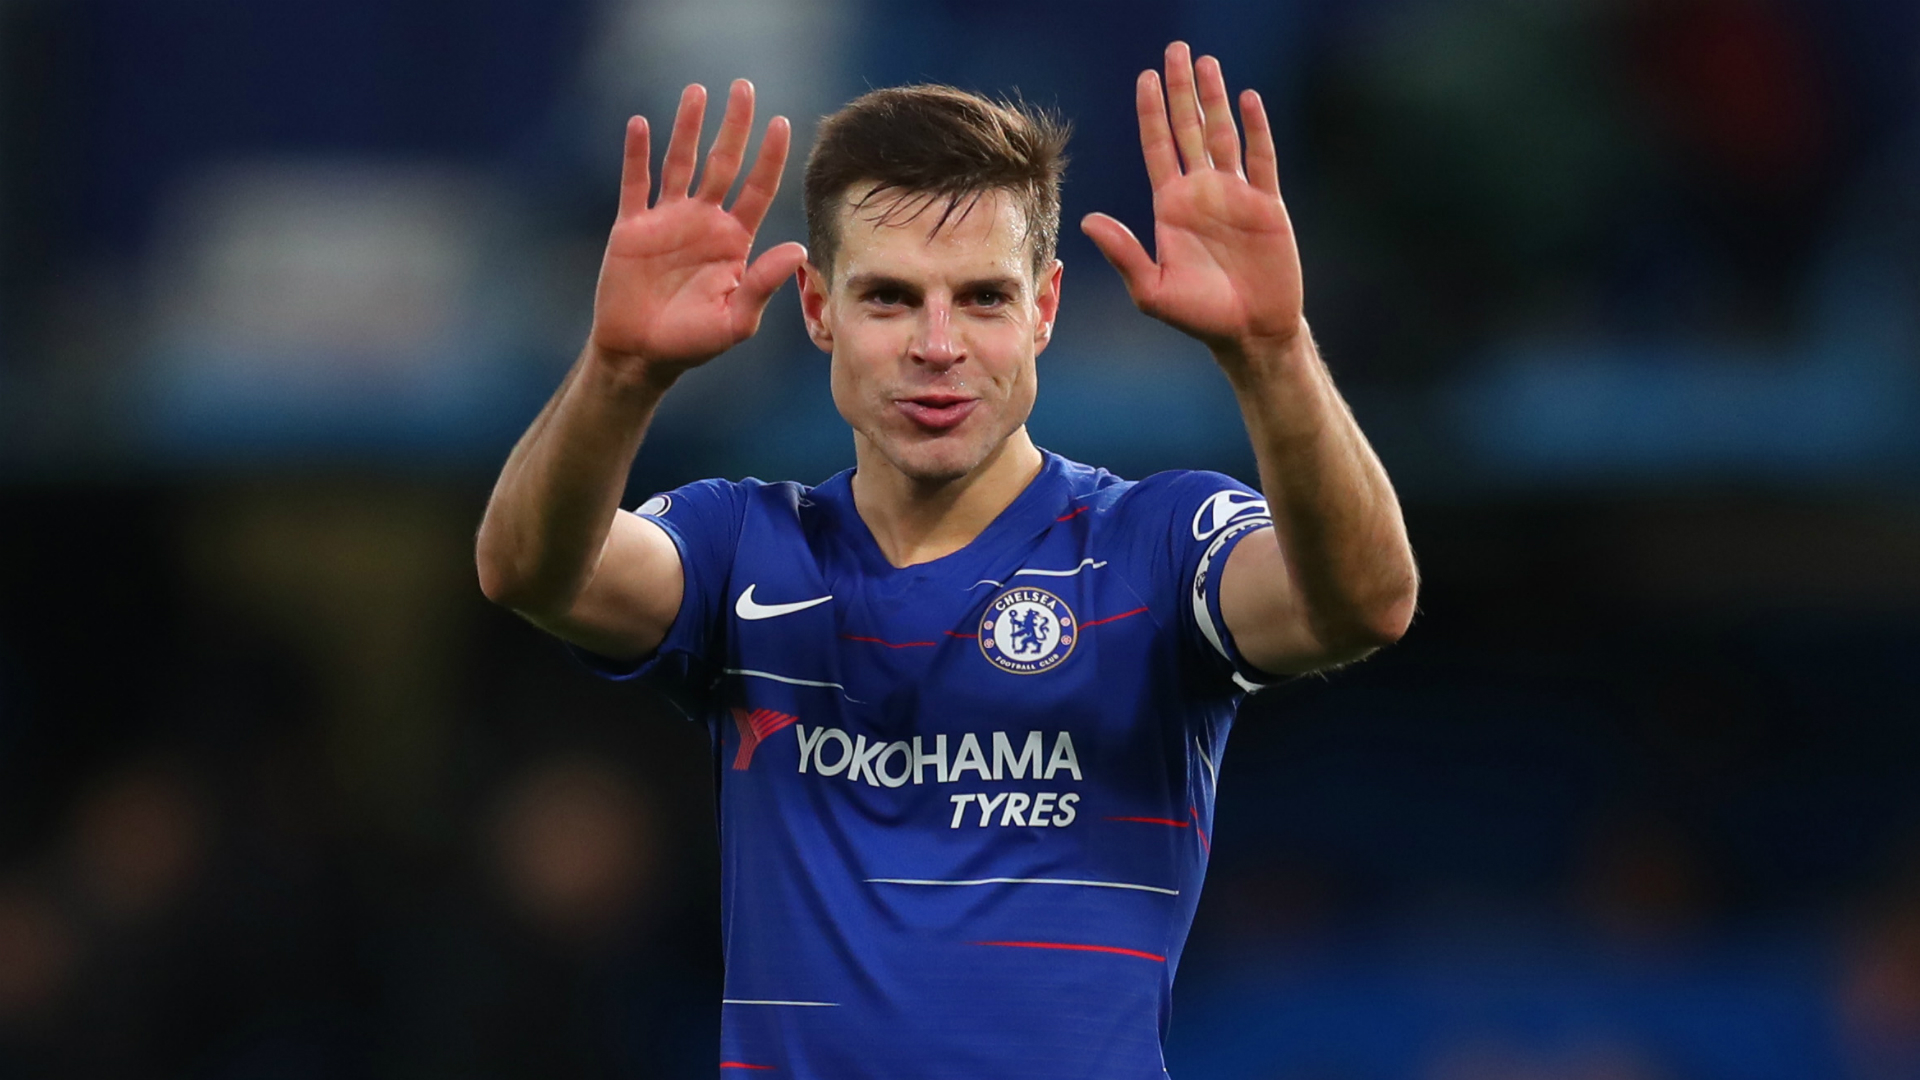 As pressure mounts on Chelsea boss Maurizio Sarri, Cesar Azpilicueta has promised the players will do their utmost to improve results.